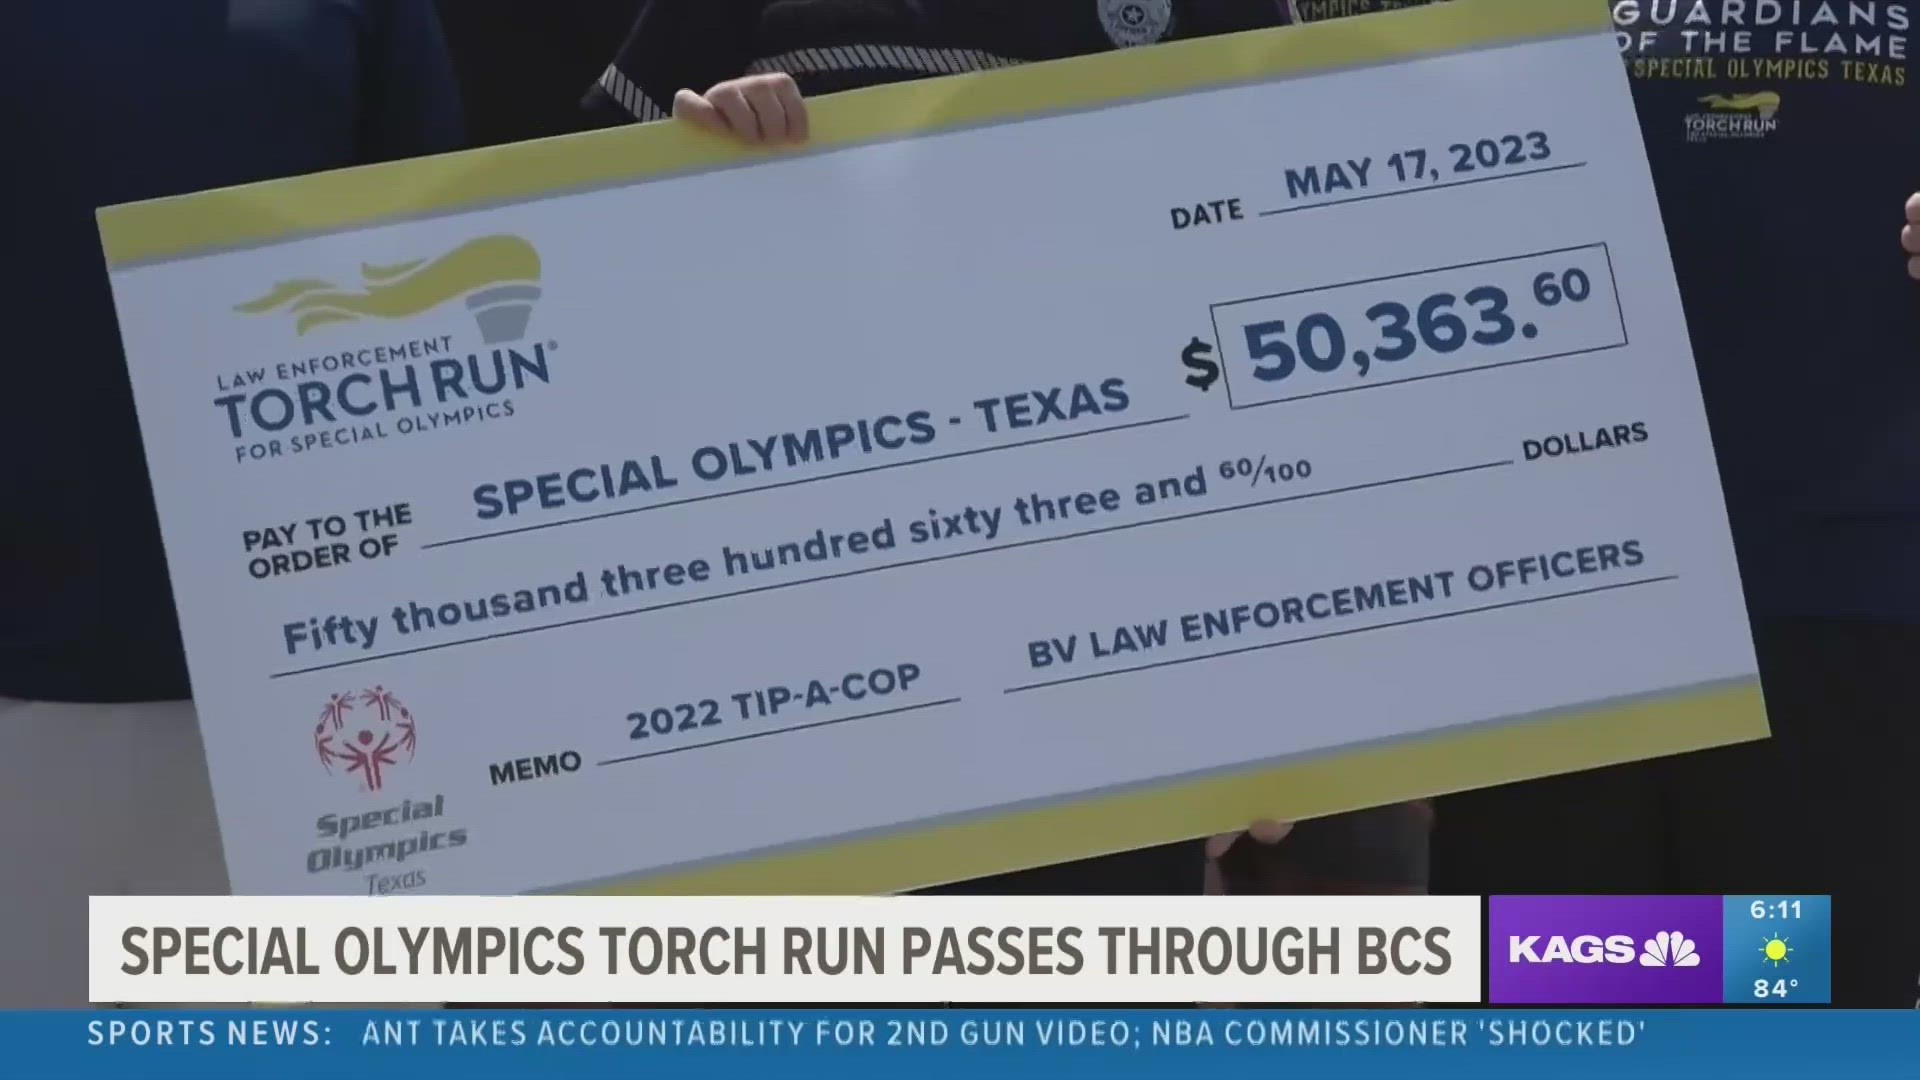 A $50,363 check was presented to the Special Olympics during the event.